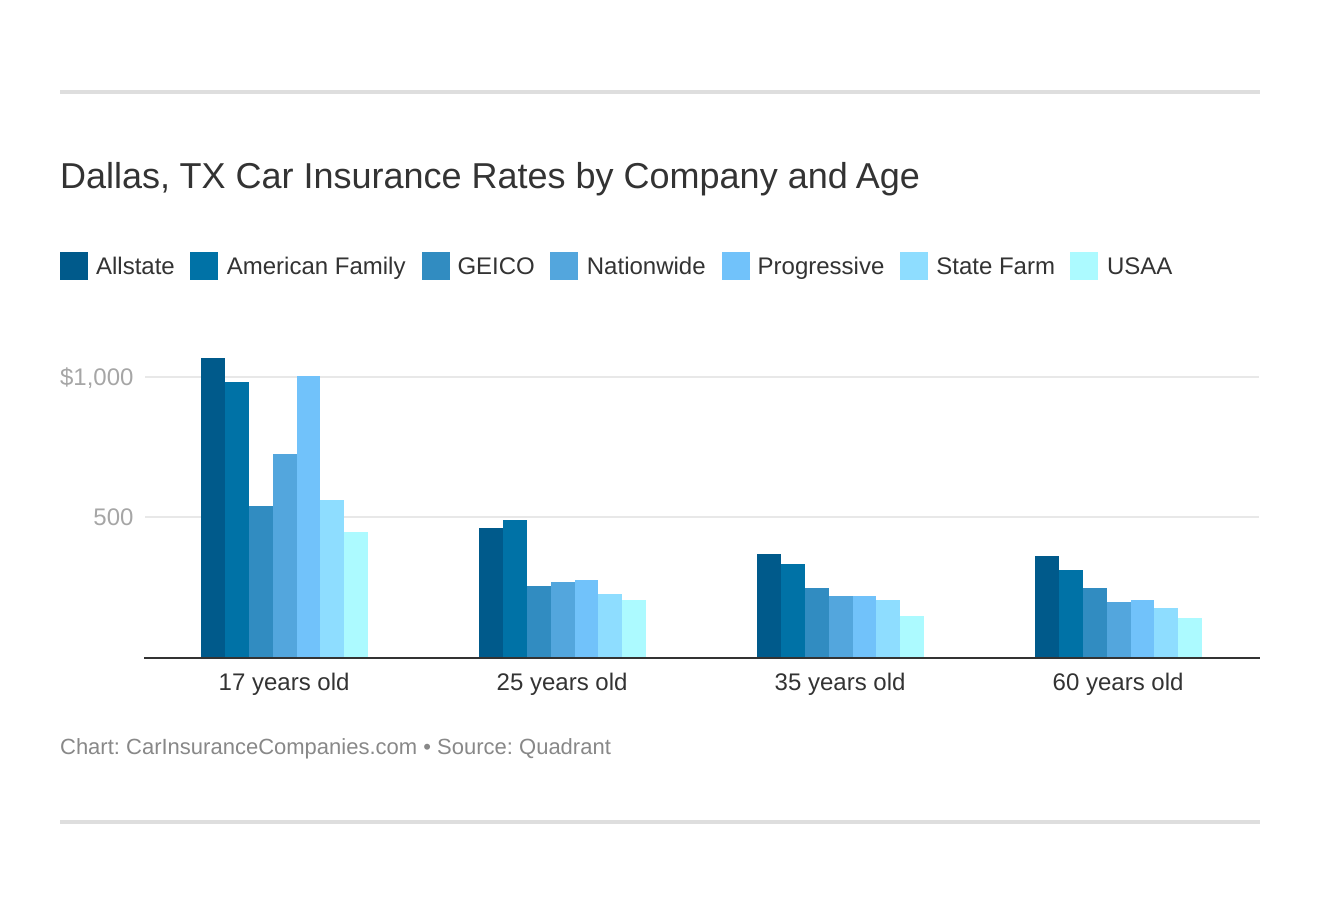 Dallas, TX Car Insurance Rates by Company and Age